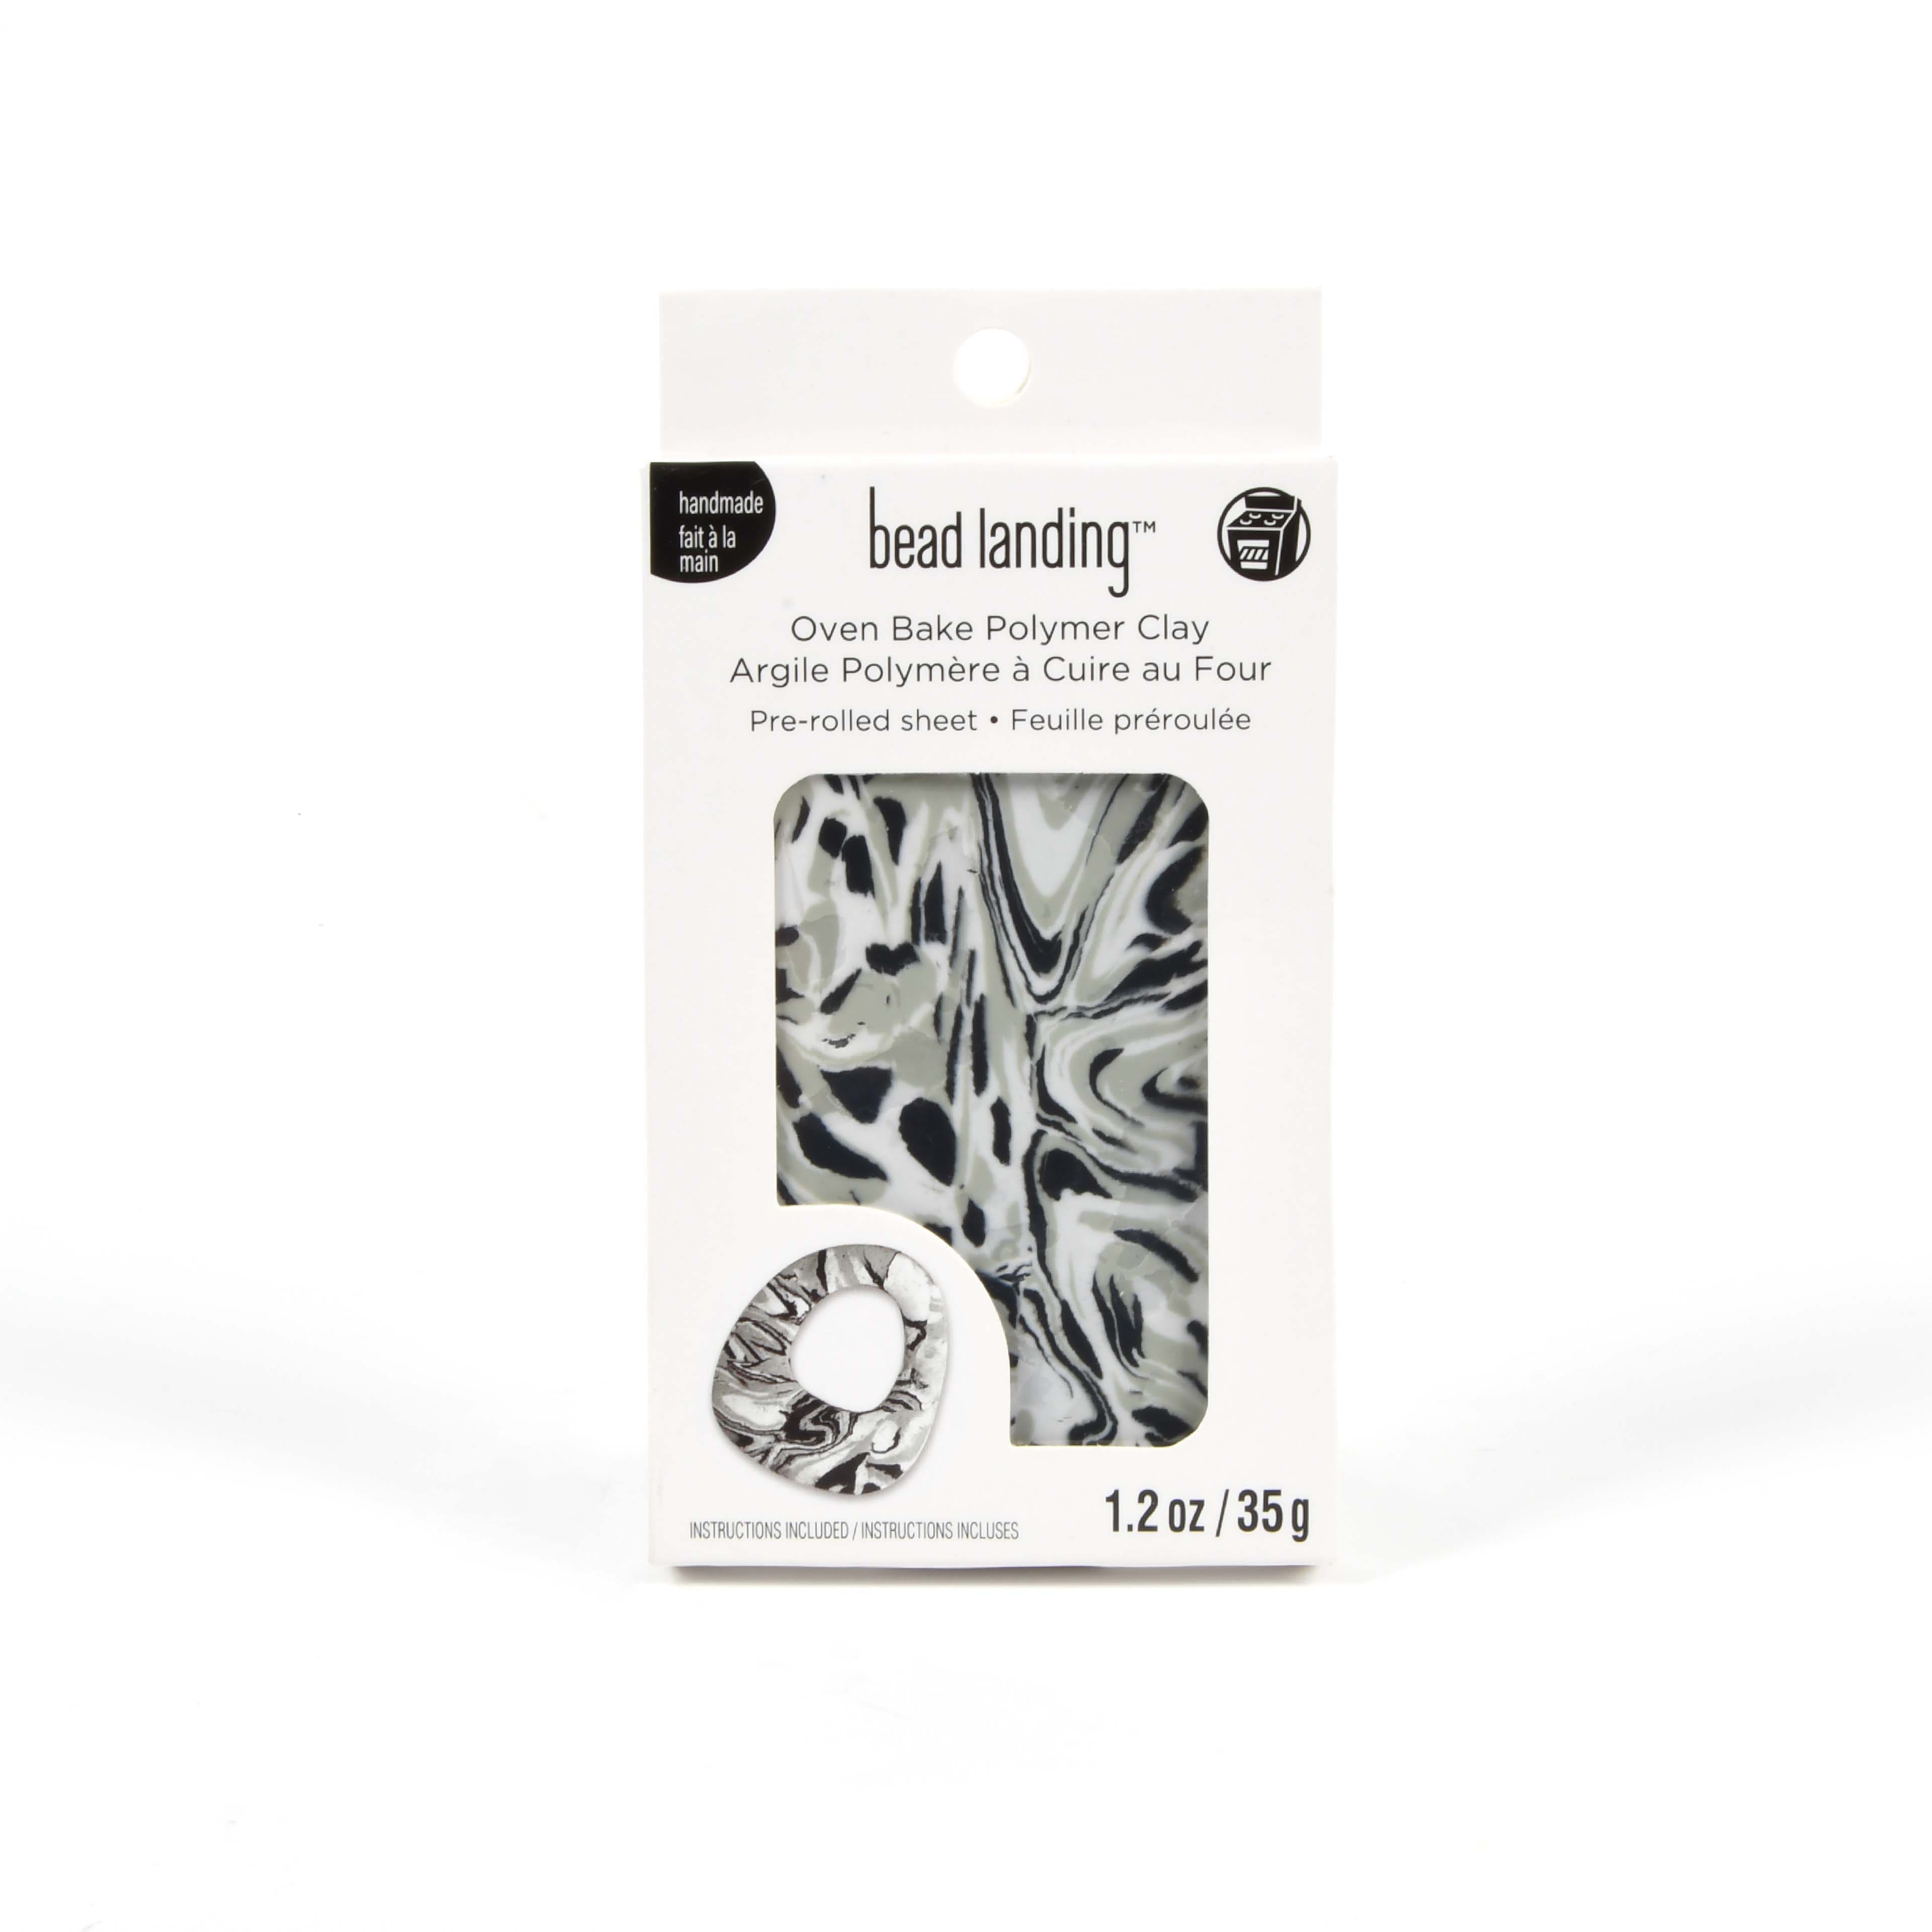 Grays Oven Bake Polymer Clay by Bead Landing™